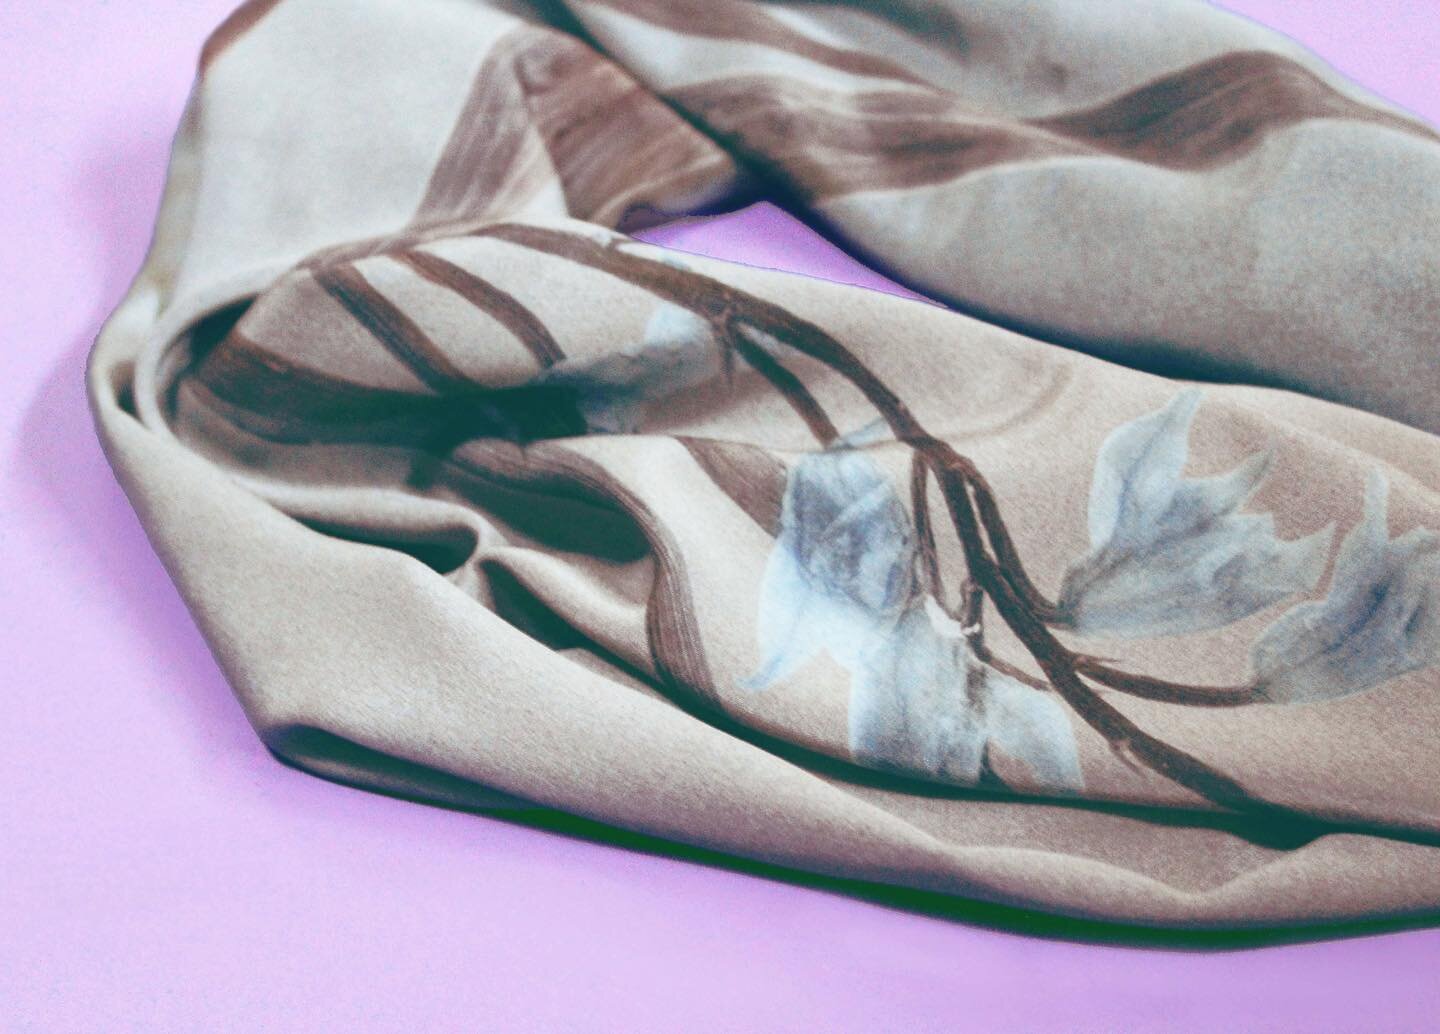 The &ldquo;Wild Orchid&rdquo; silk scarf celebrates the beauty of one of our rarest native orchid species. This Irish orchid is among our most unusual flora and can be found growing wild across the unique landscape of the Burren, Co. Clare. 

The neu